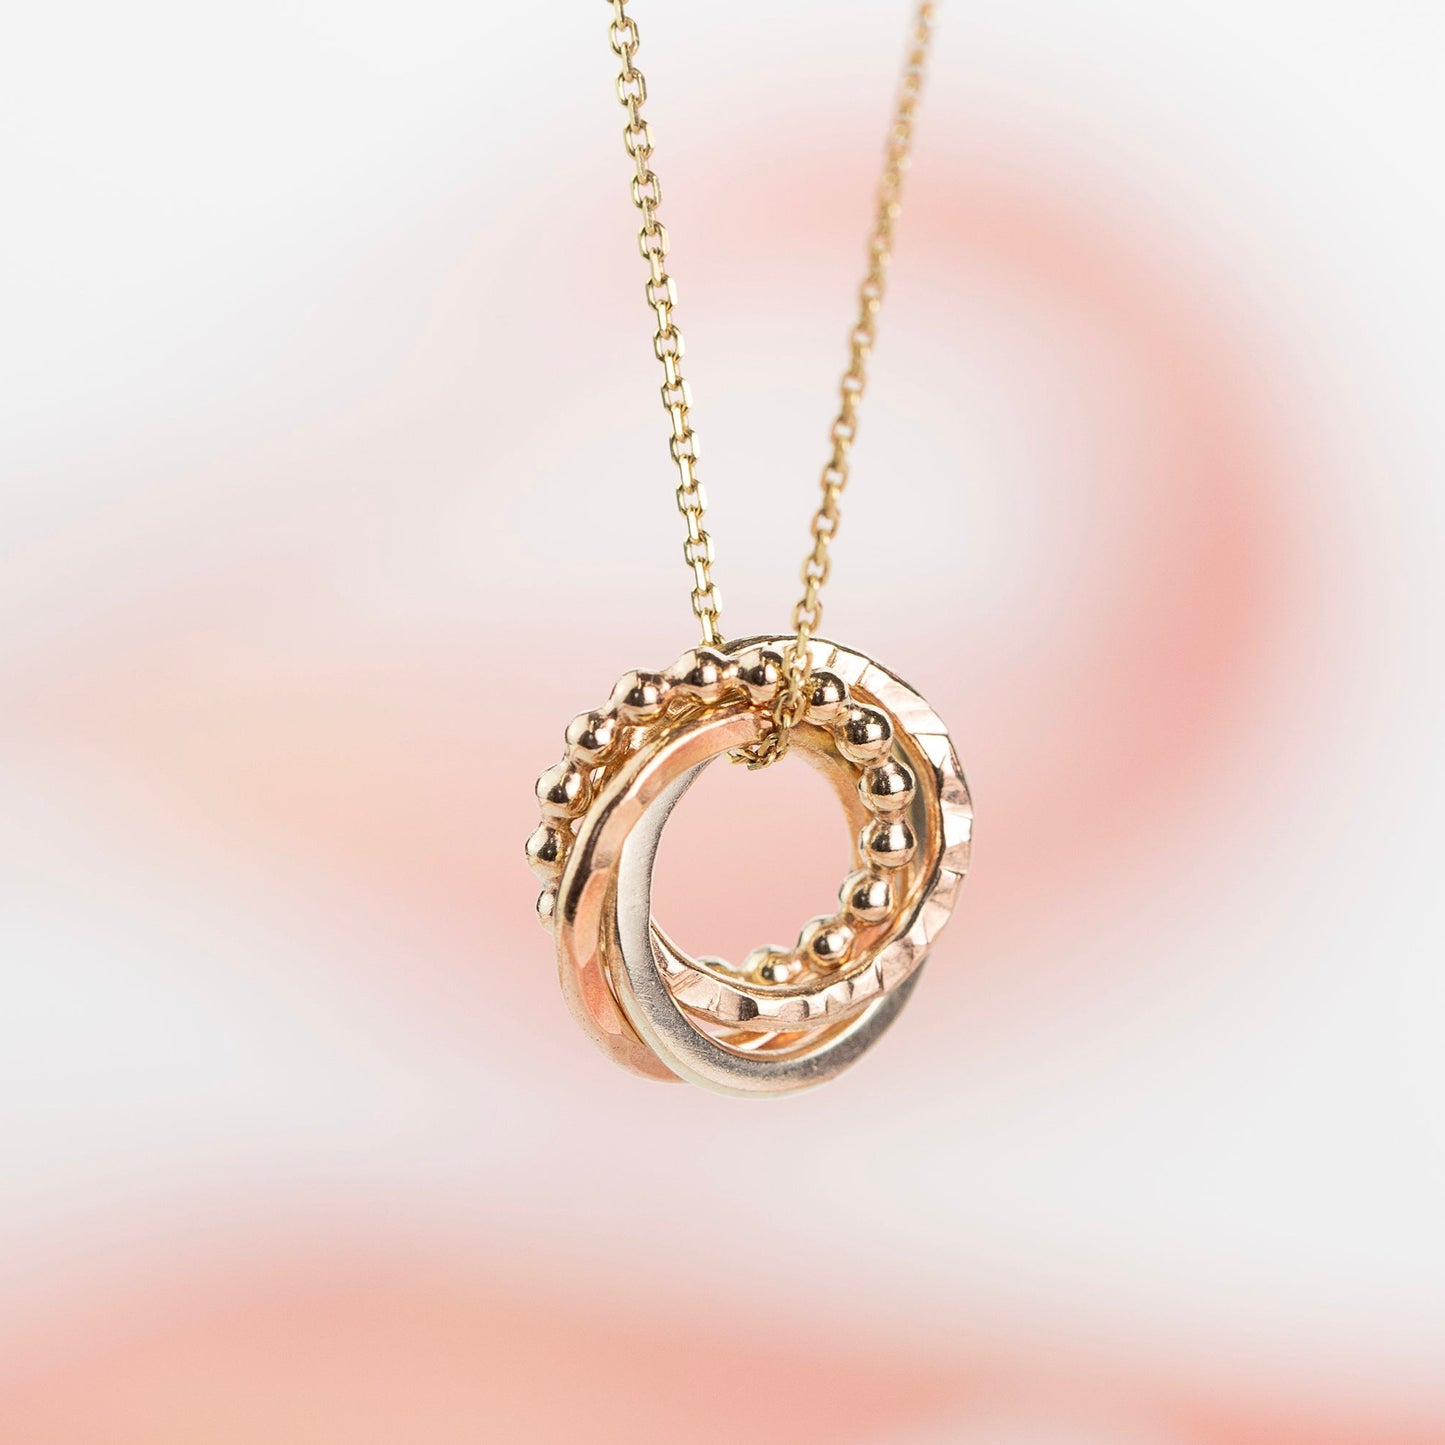 4 Links for 4 Loved Ones - Love Knot Necklace - 9kt Gold, Rose Gold, White Gold